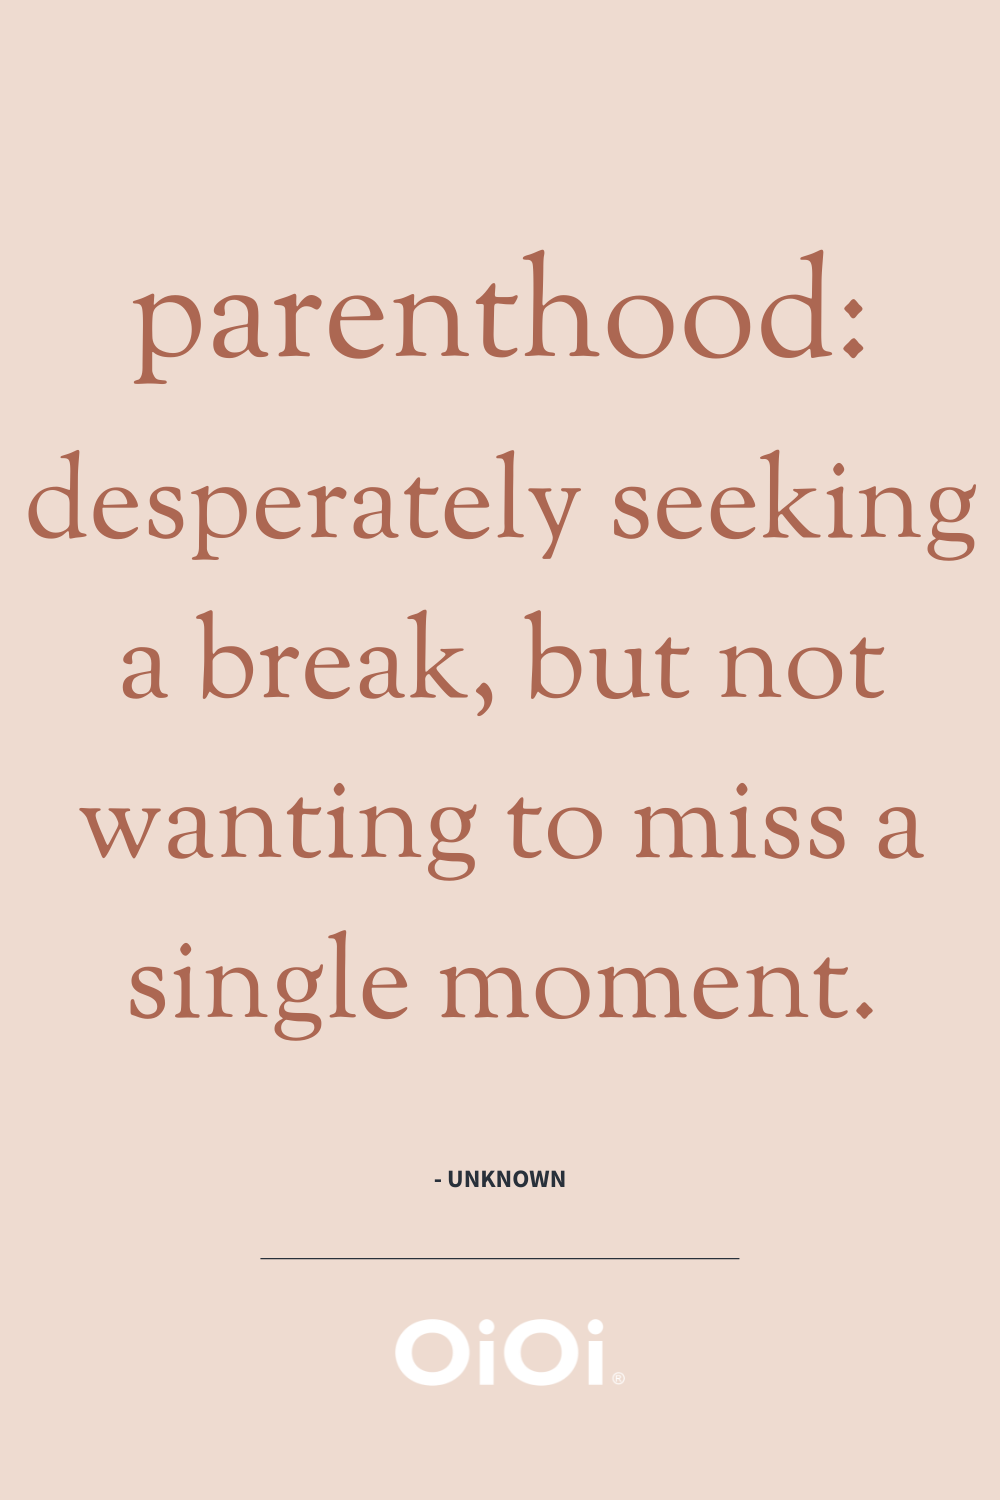 quote about parenthood